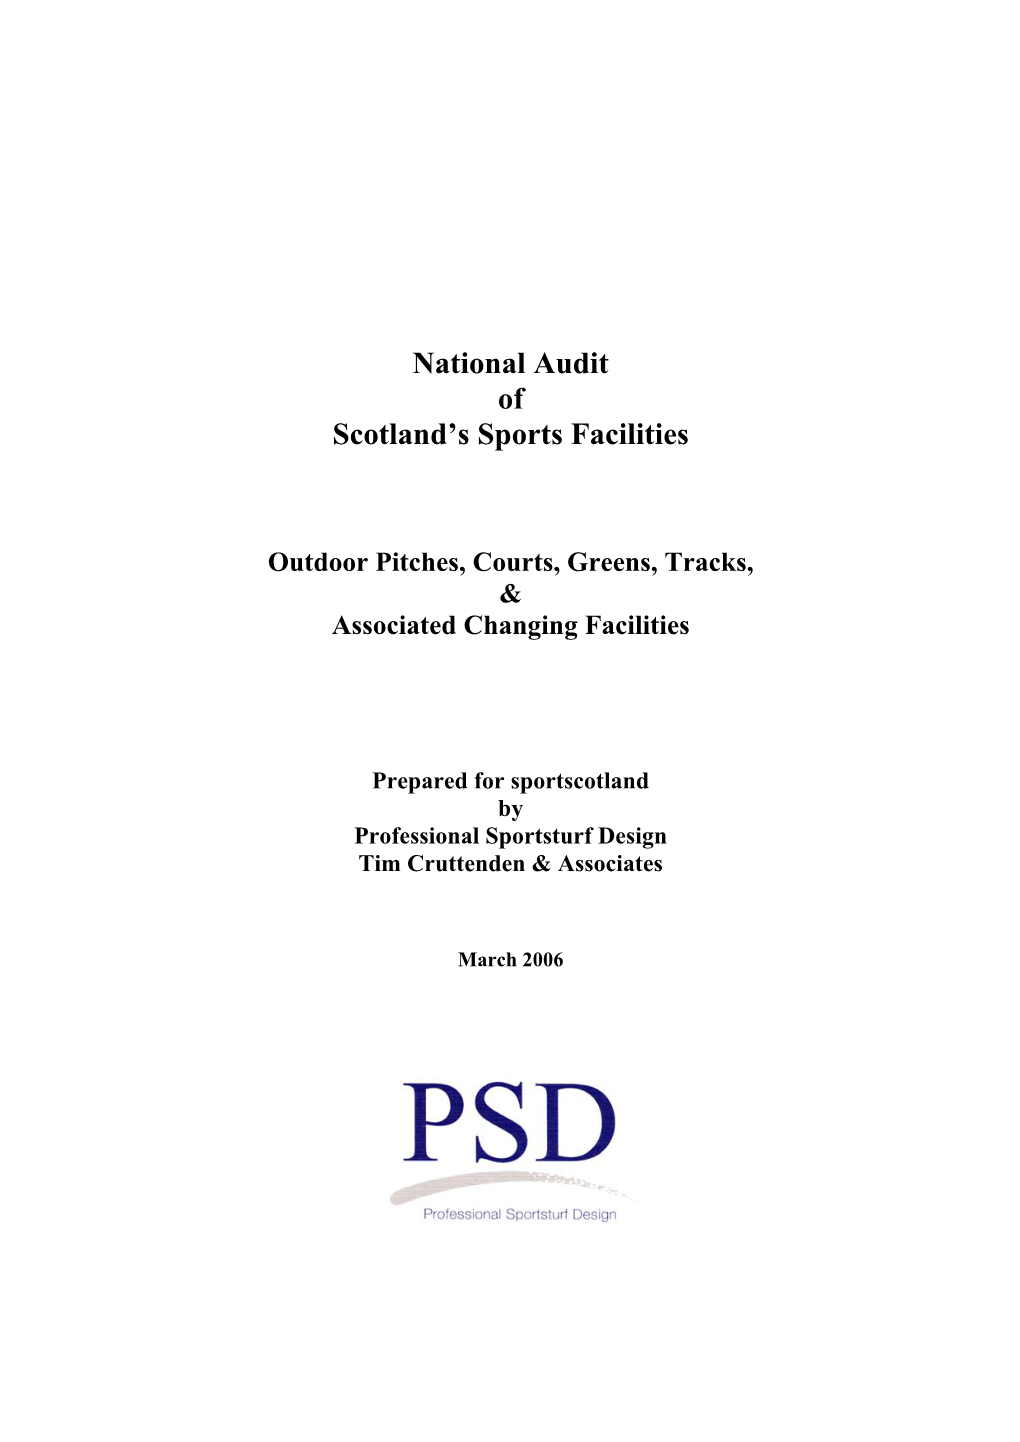 National Audit of Scotland's Outdoor Sports Facilities